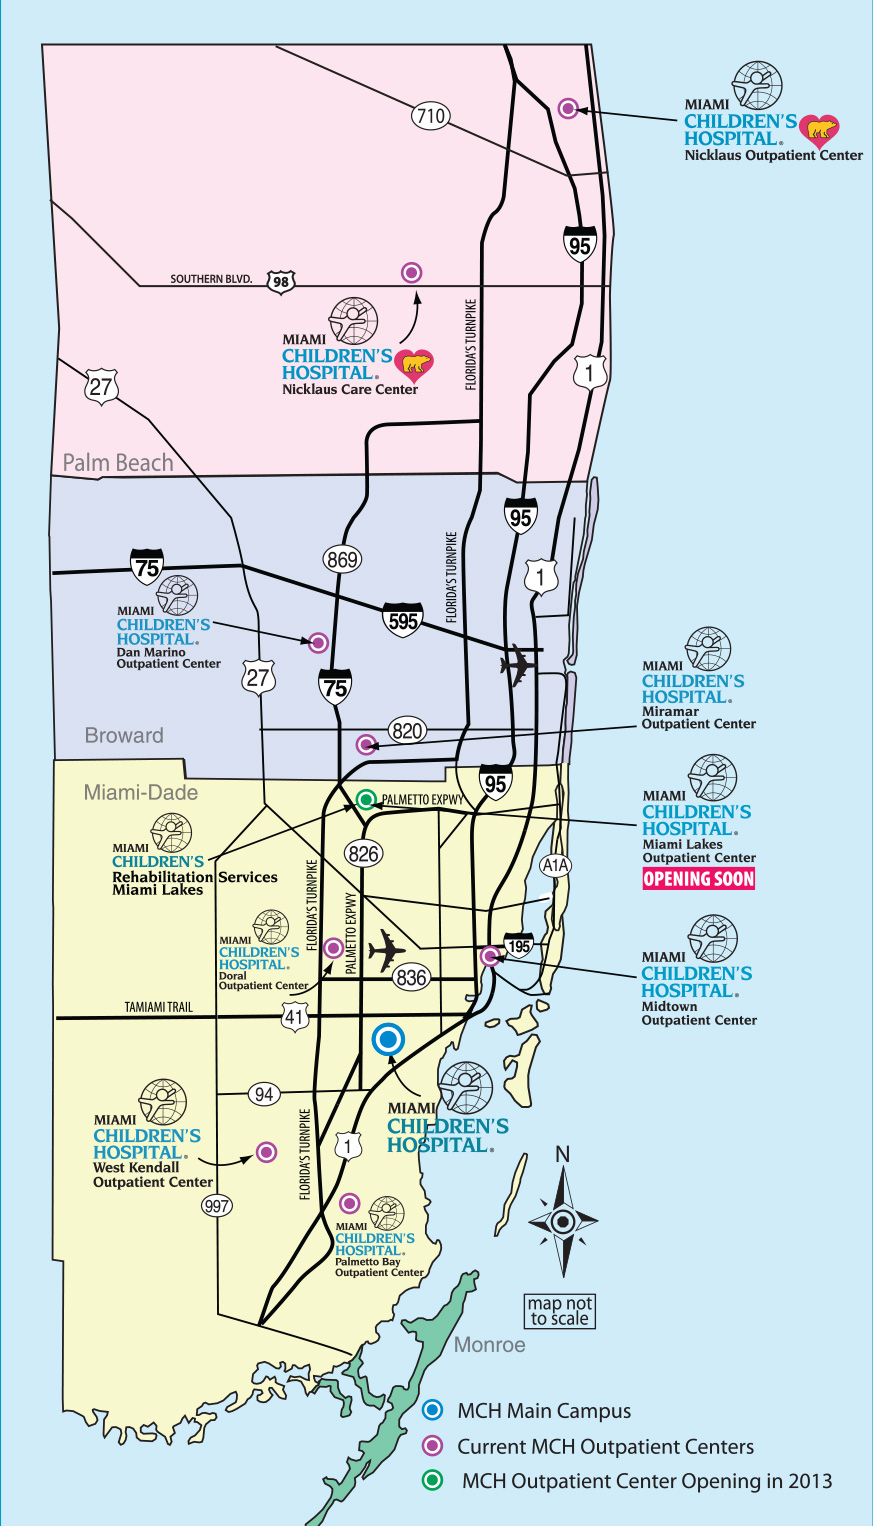 map of south east florida with pinpoints for center locations.